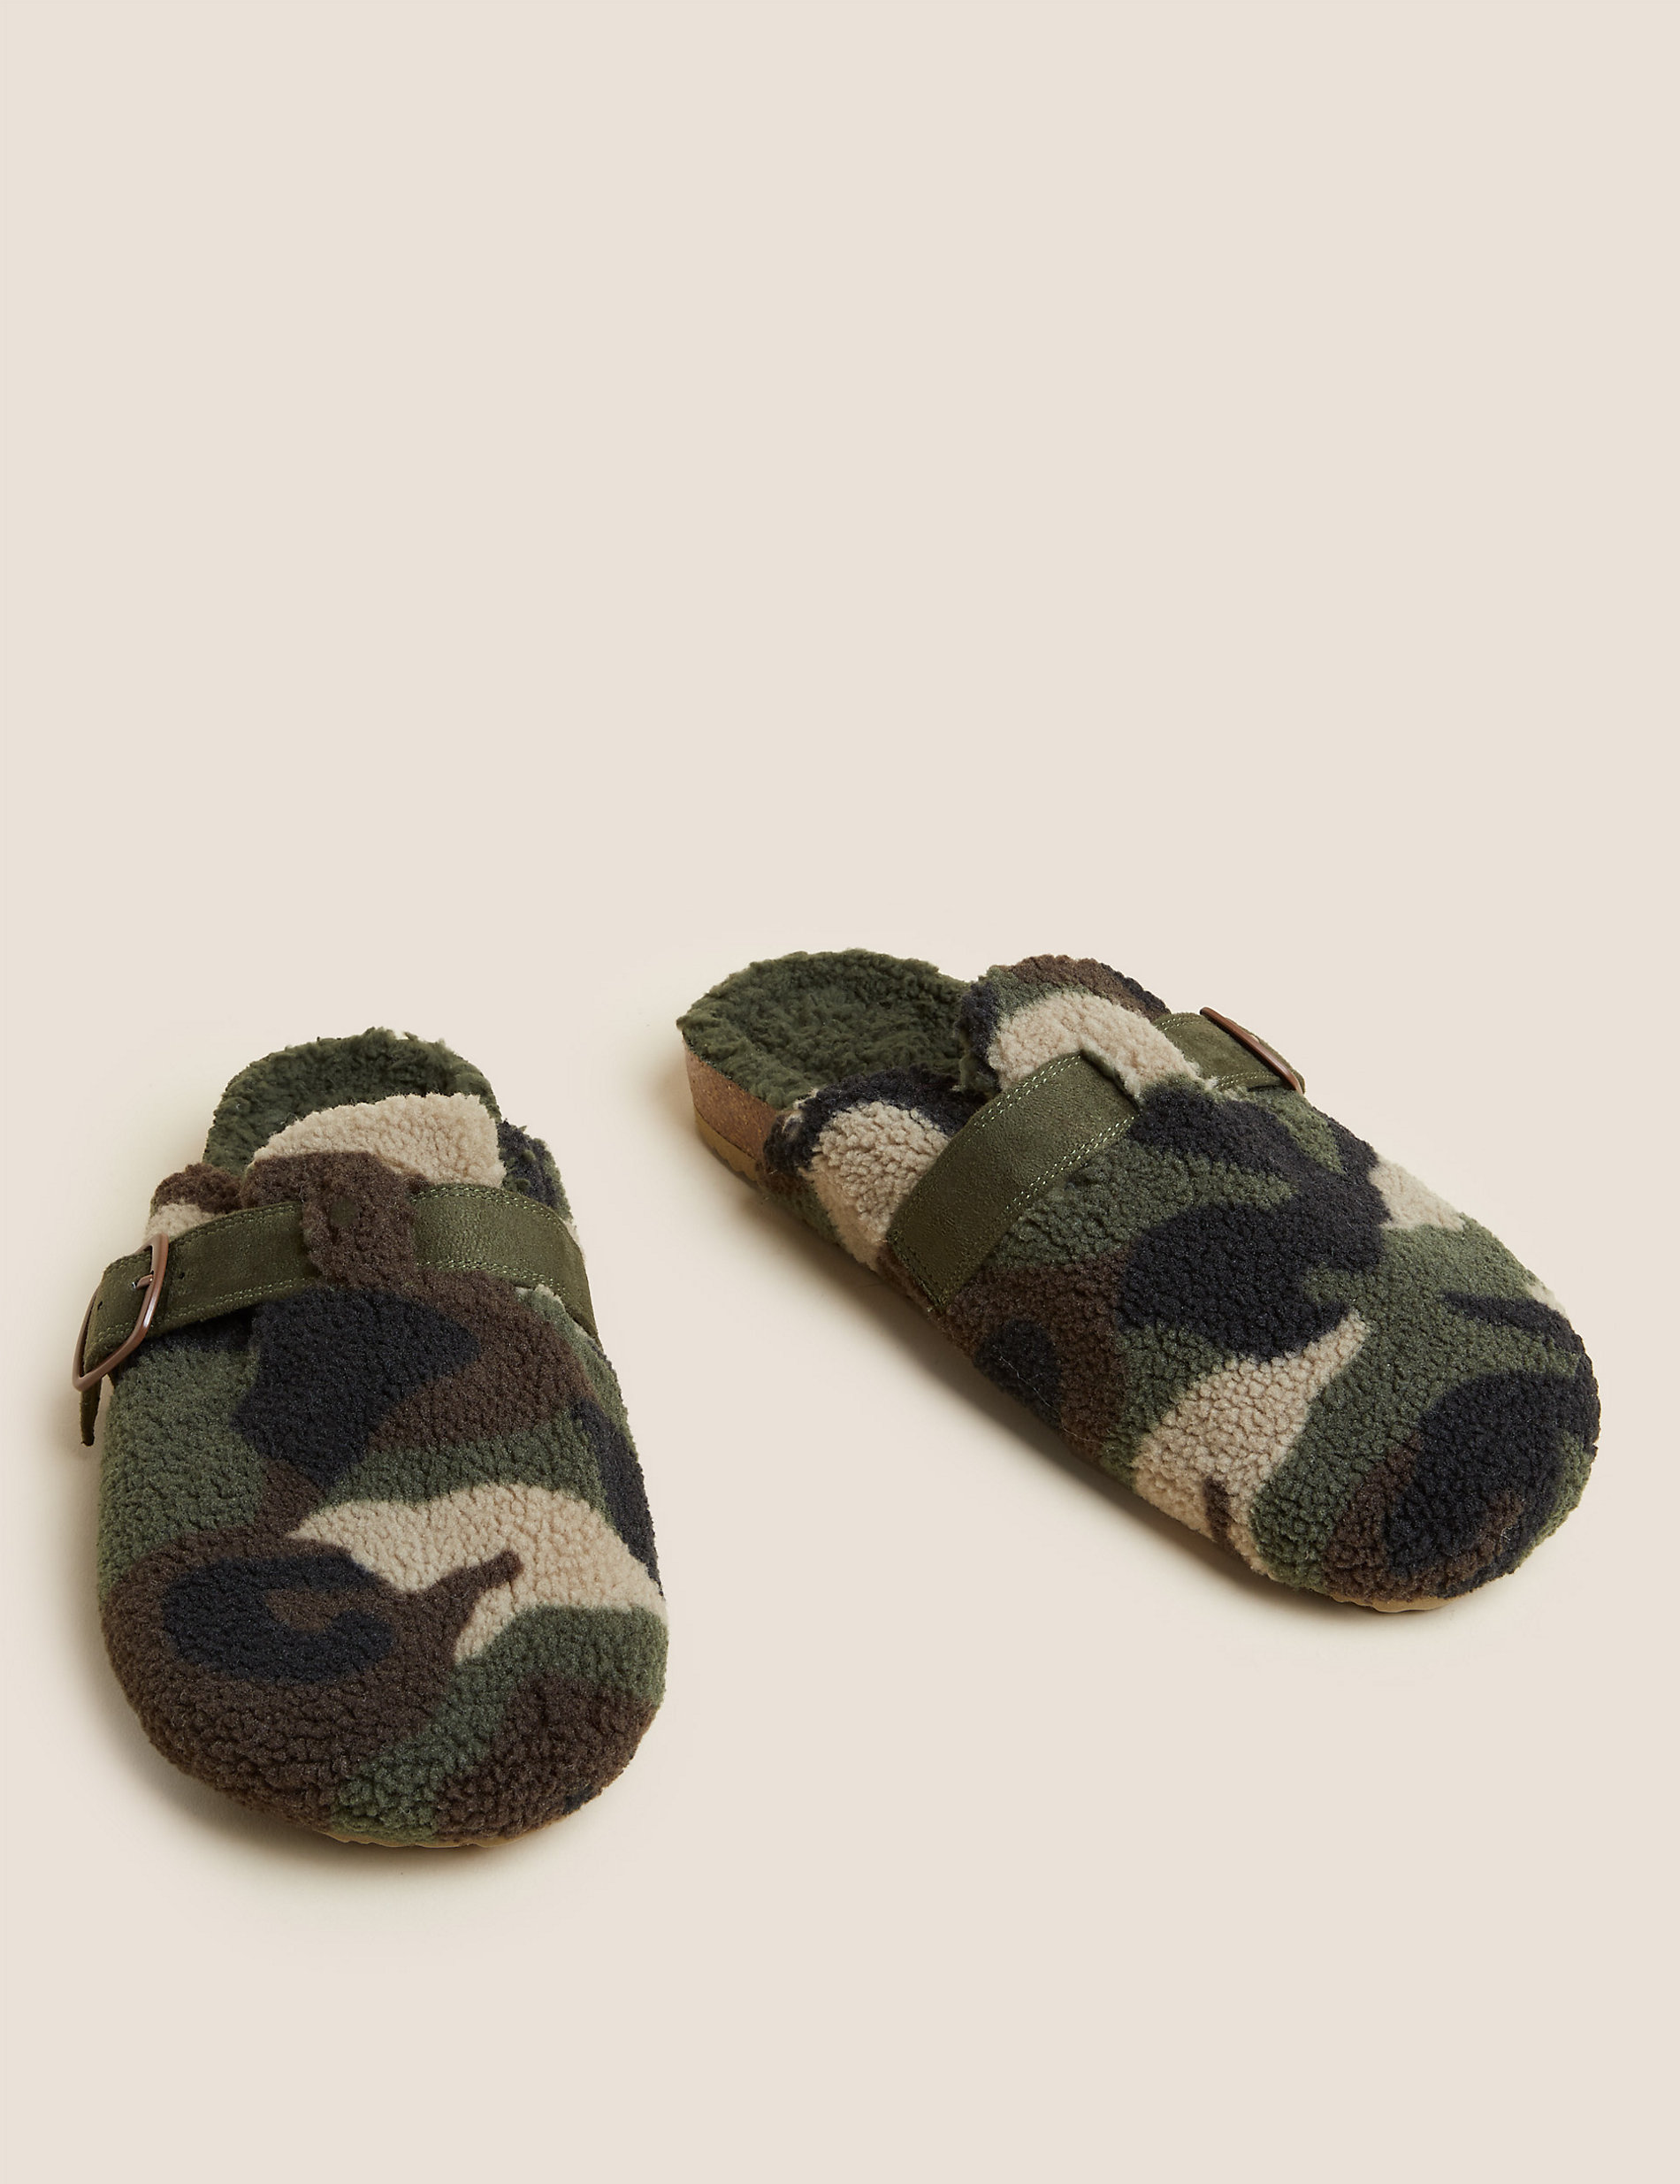 Kids’ Camouflage Slippers (13 Small - 7 Large)